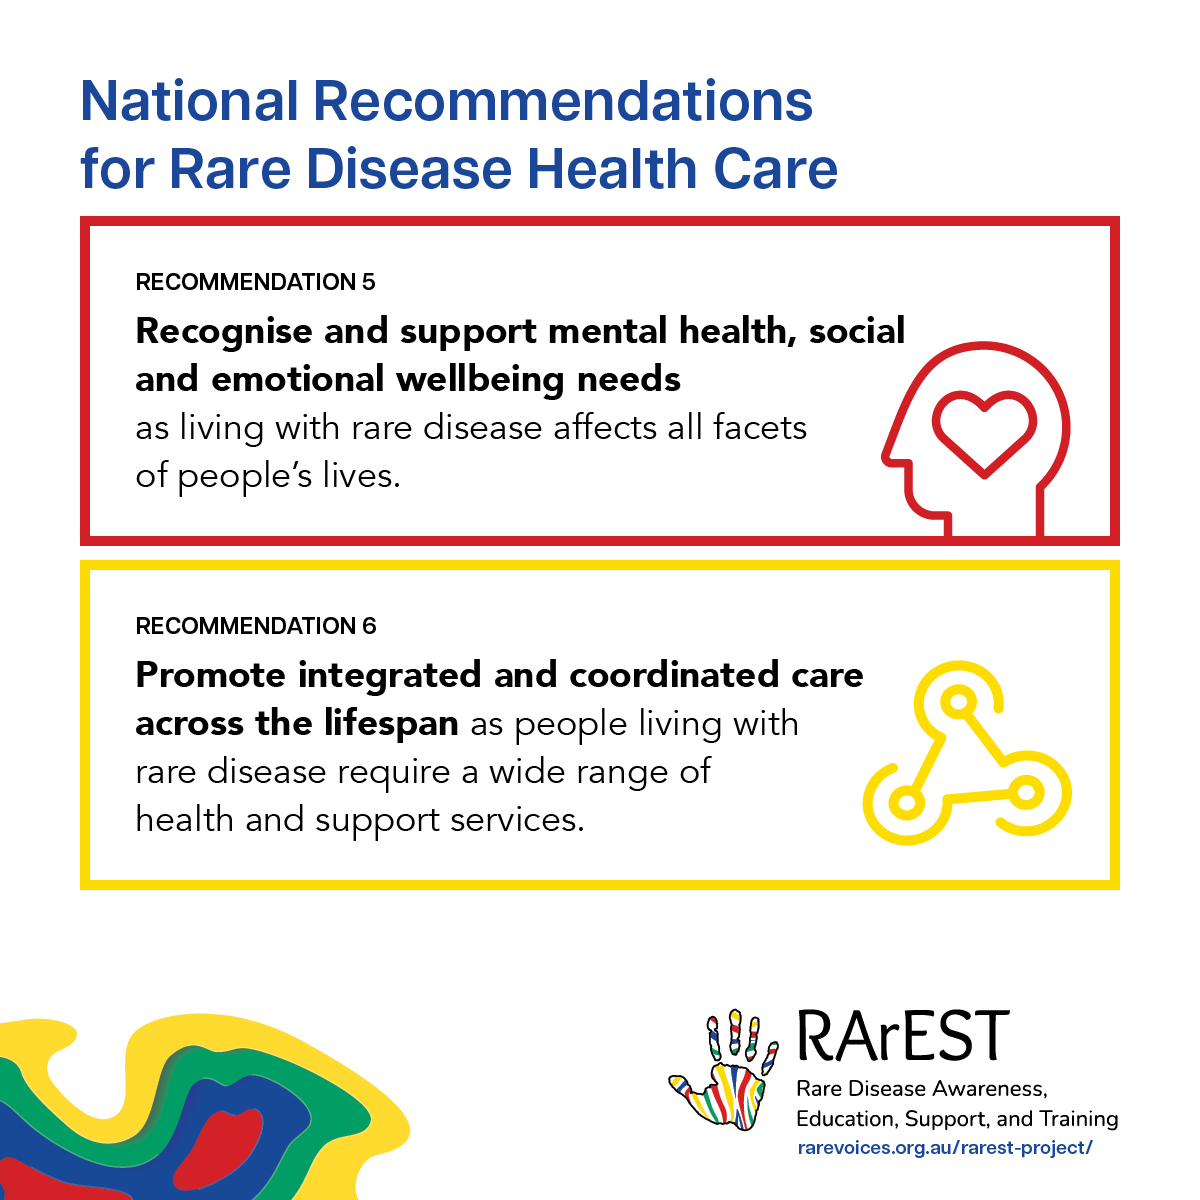 “The eight recommendations describe practical steps that Australian health professionals can take now to provide optimal care that aligns with the preferences and needs of people living with rare diseases,' says Dr Palmer (@emmagenetics).